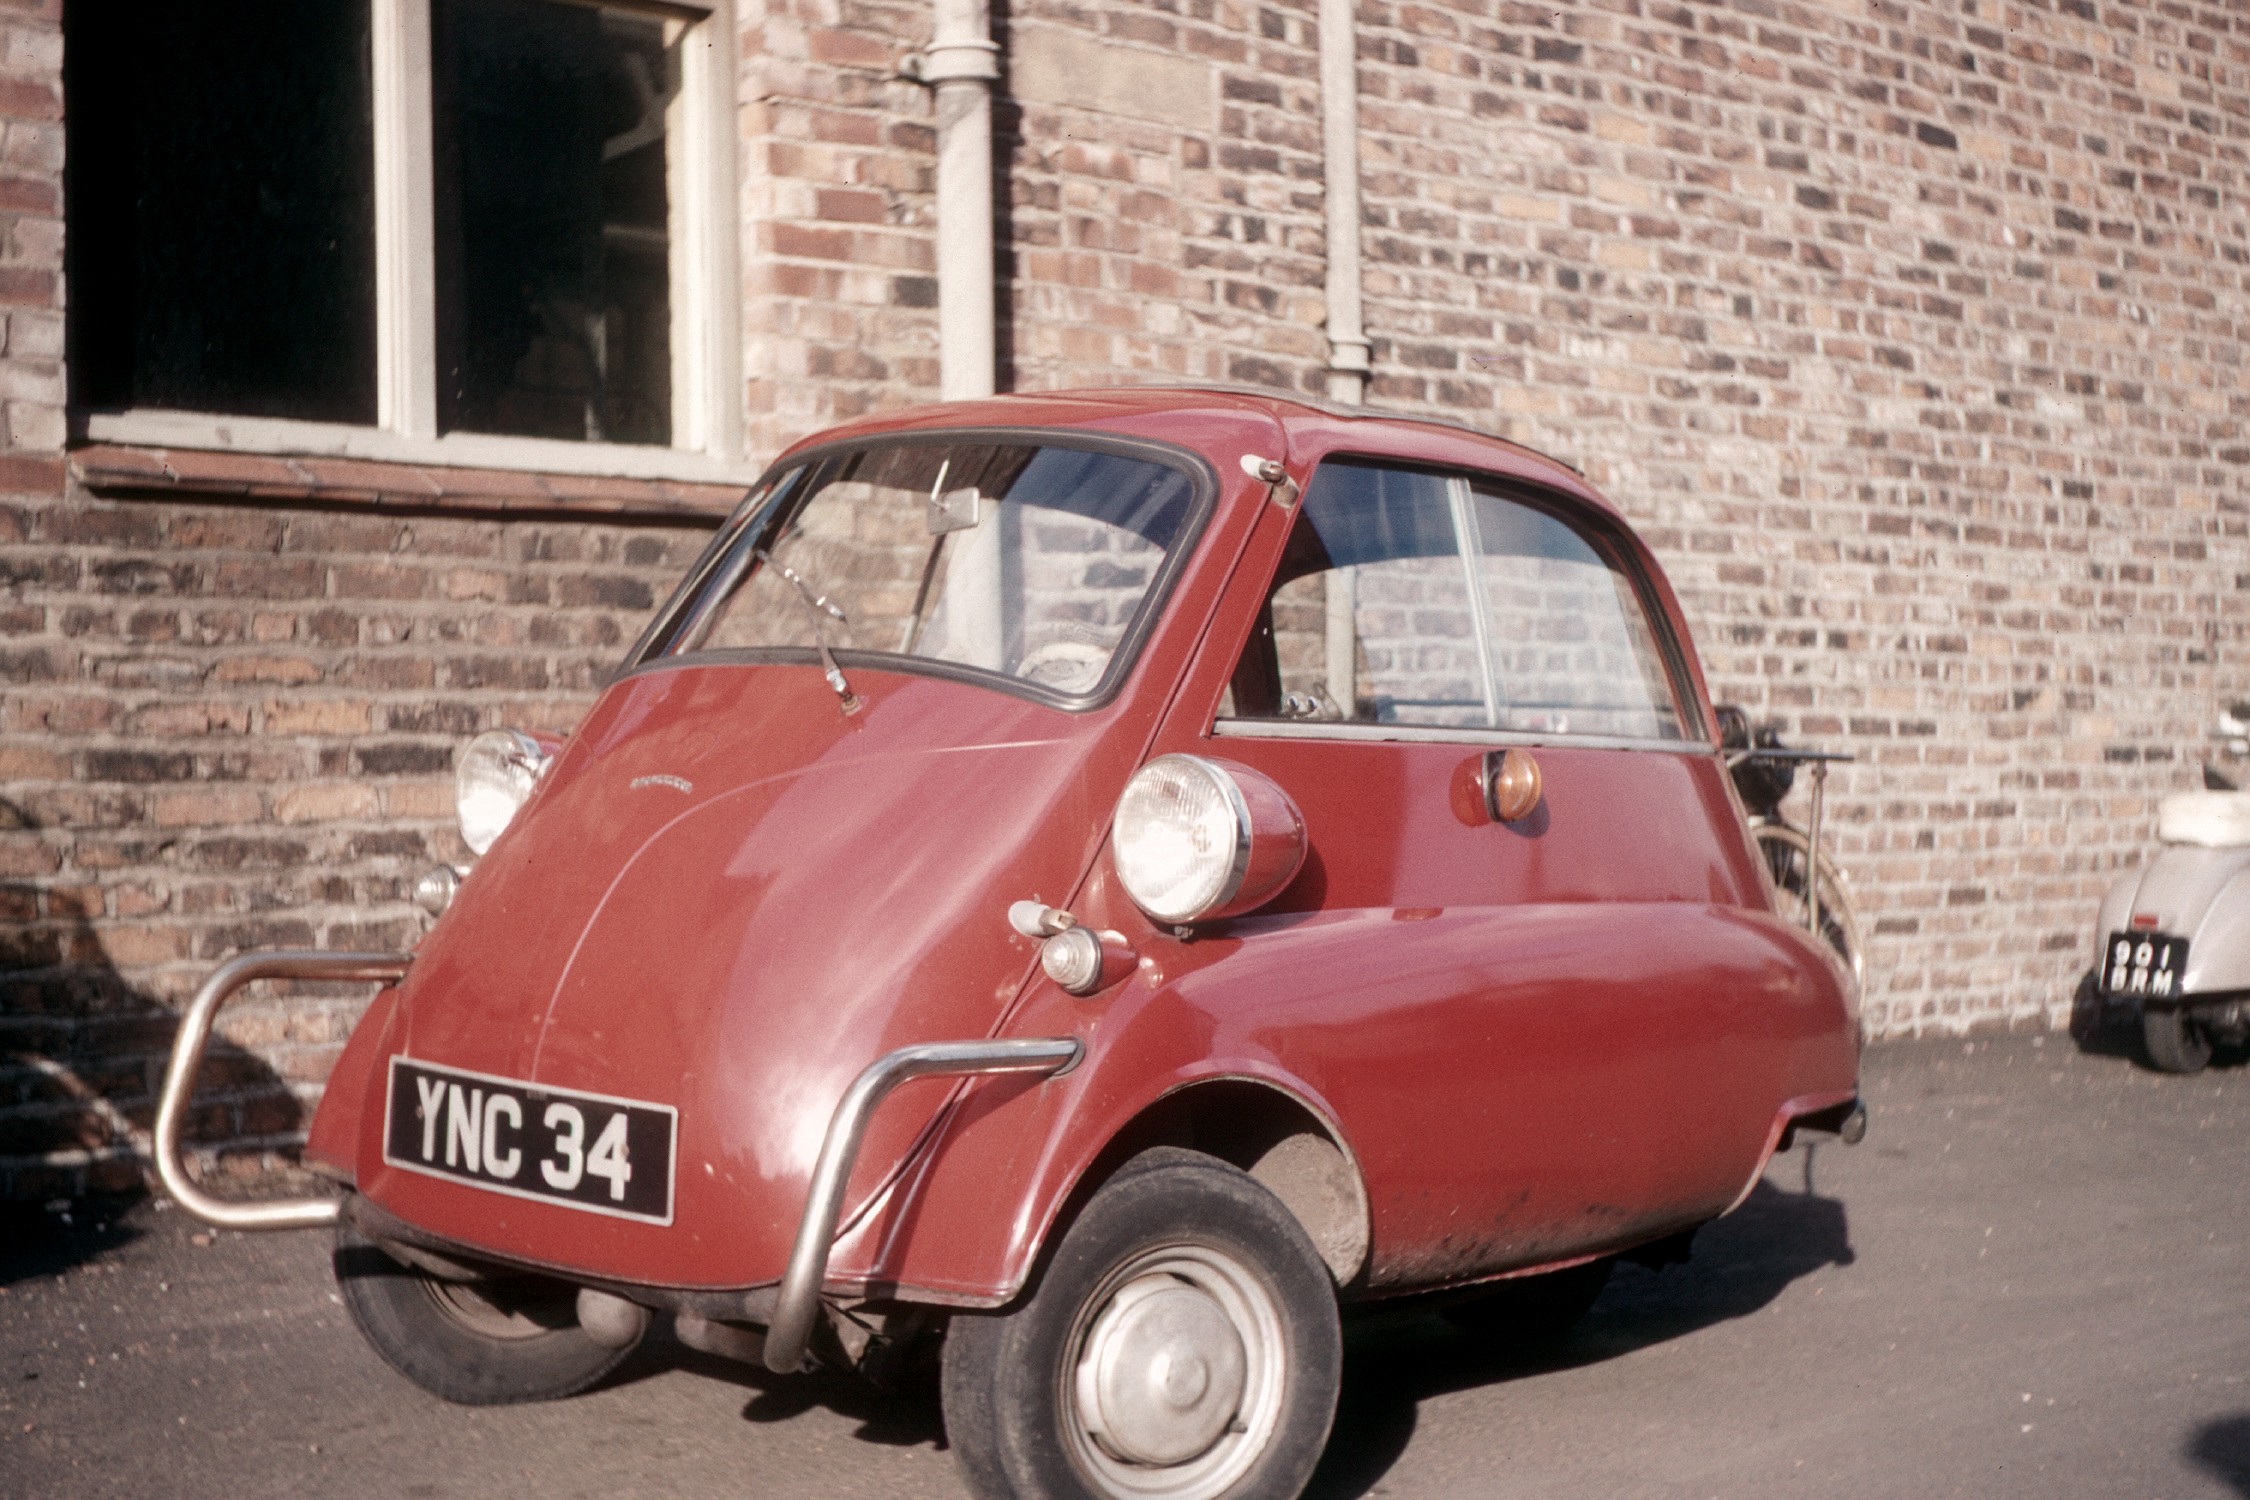 6200608s 1961 - Our first car,an Isetta! It was bought in the first half of 1960. This photo was probably taken during a trip to Anthony's.